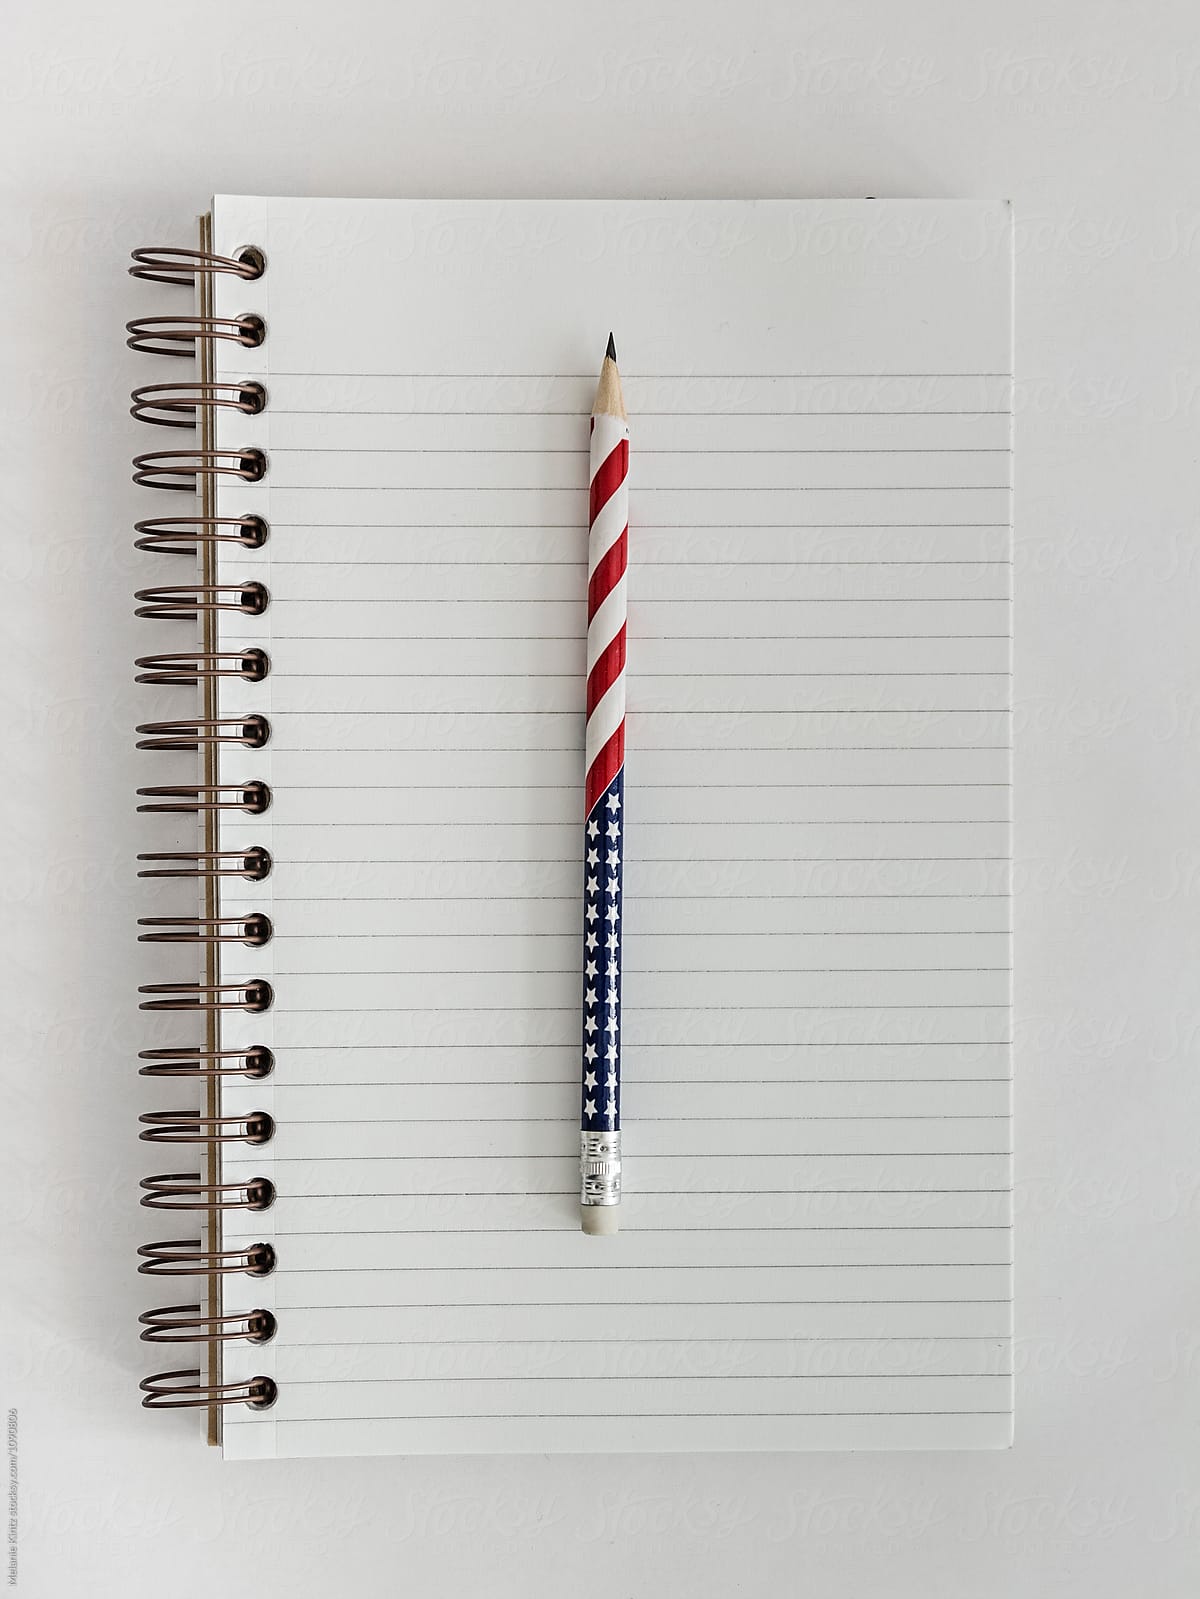 Open blank notebook with a stars and stripes pencil